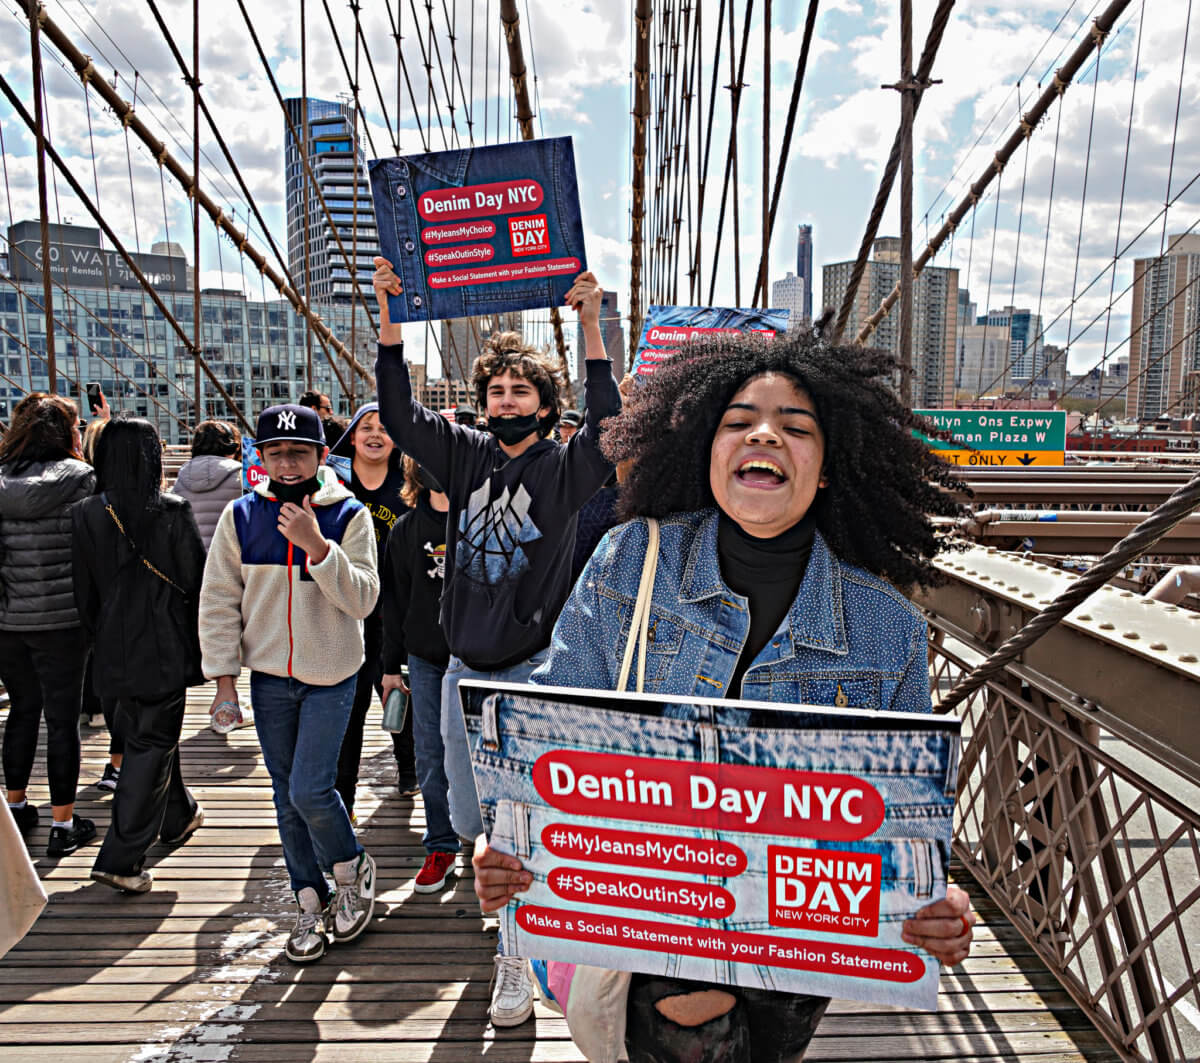 Marchers walking over Brooklyn Bridge in denim outfits holding Denim Day NYC signs including woman shouting.